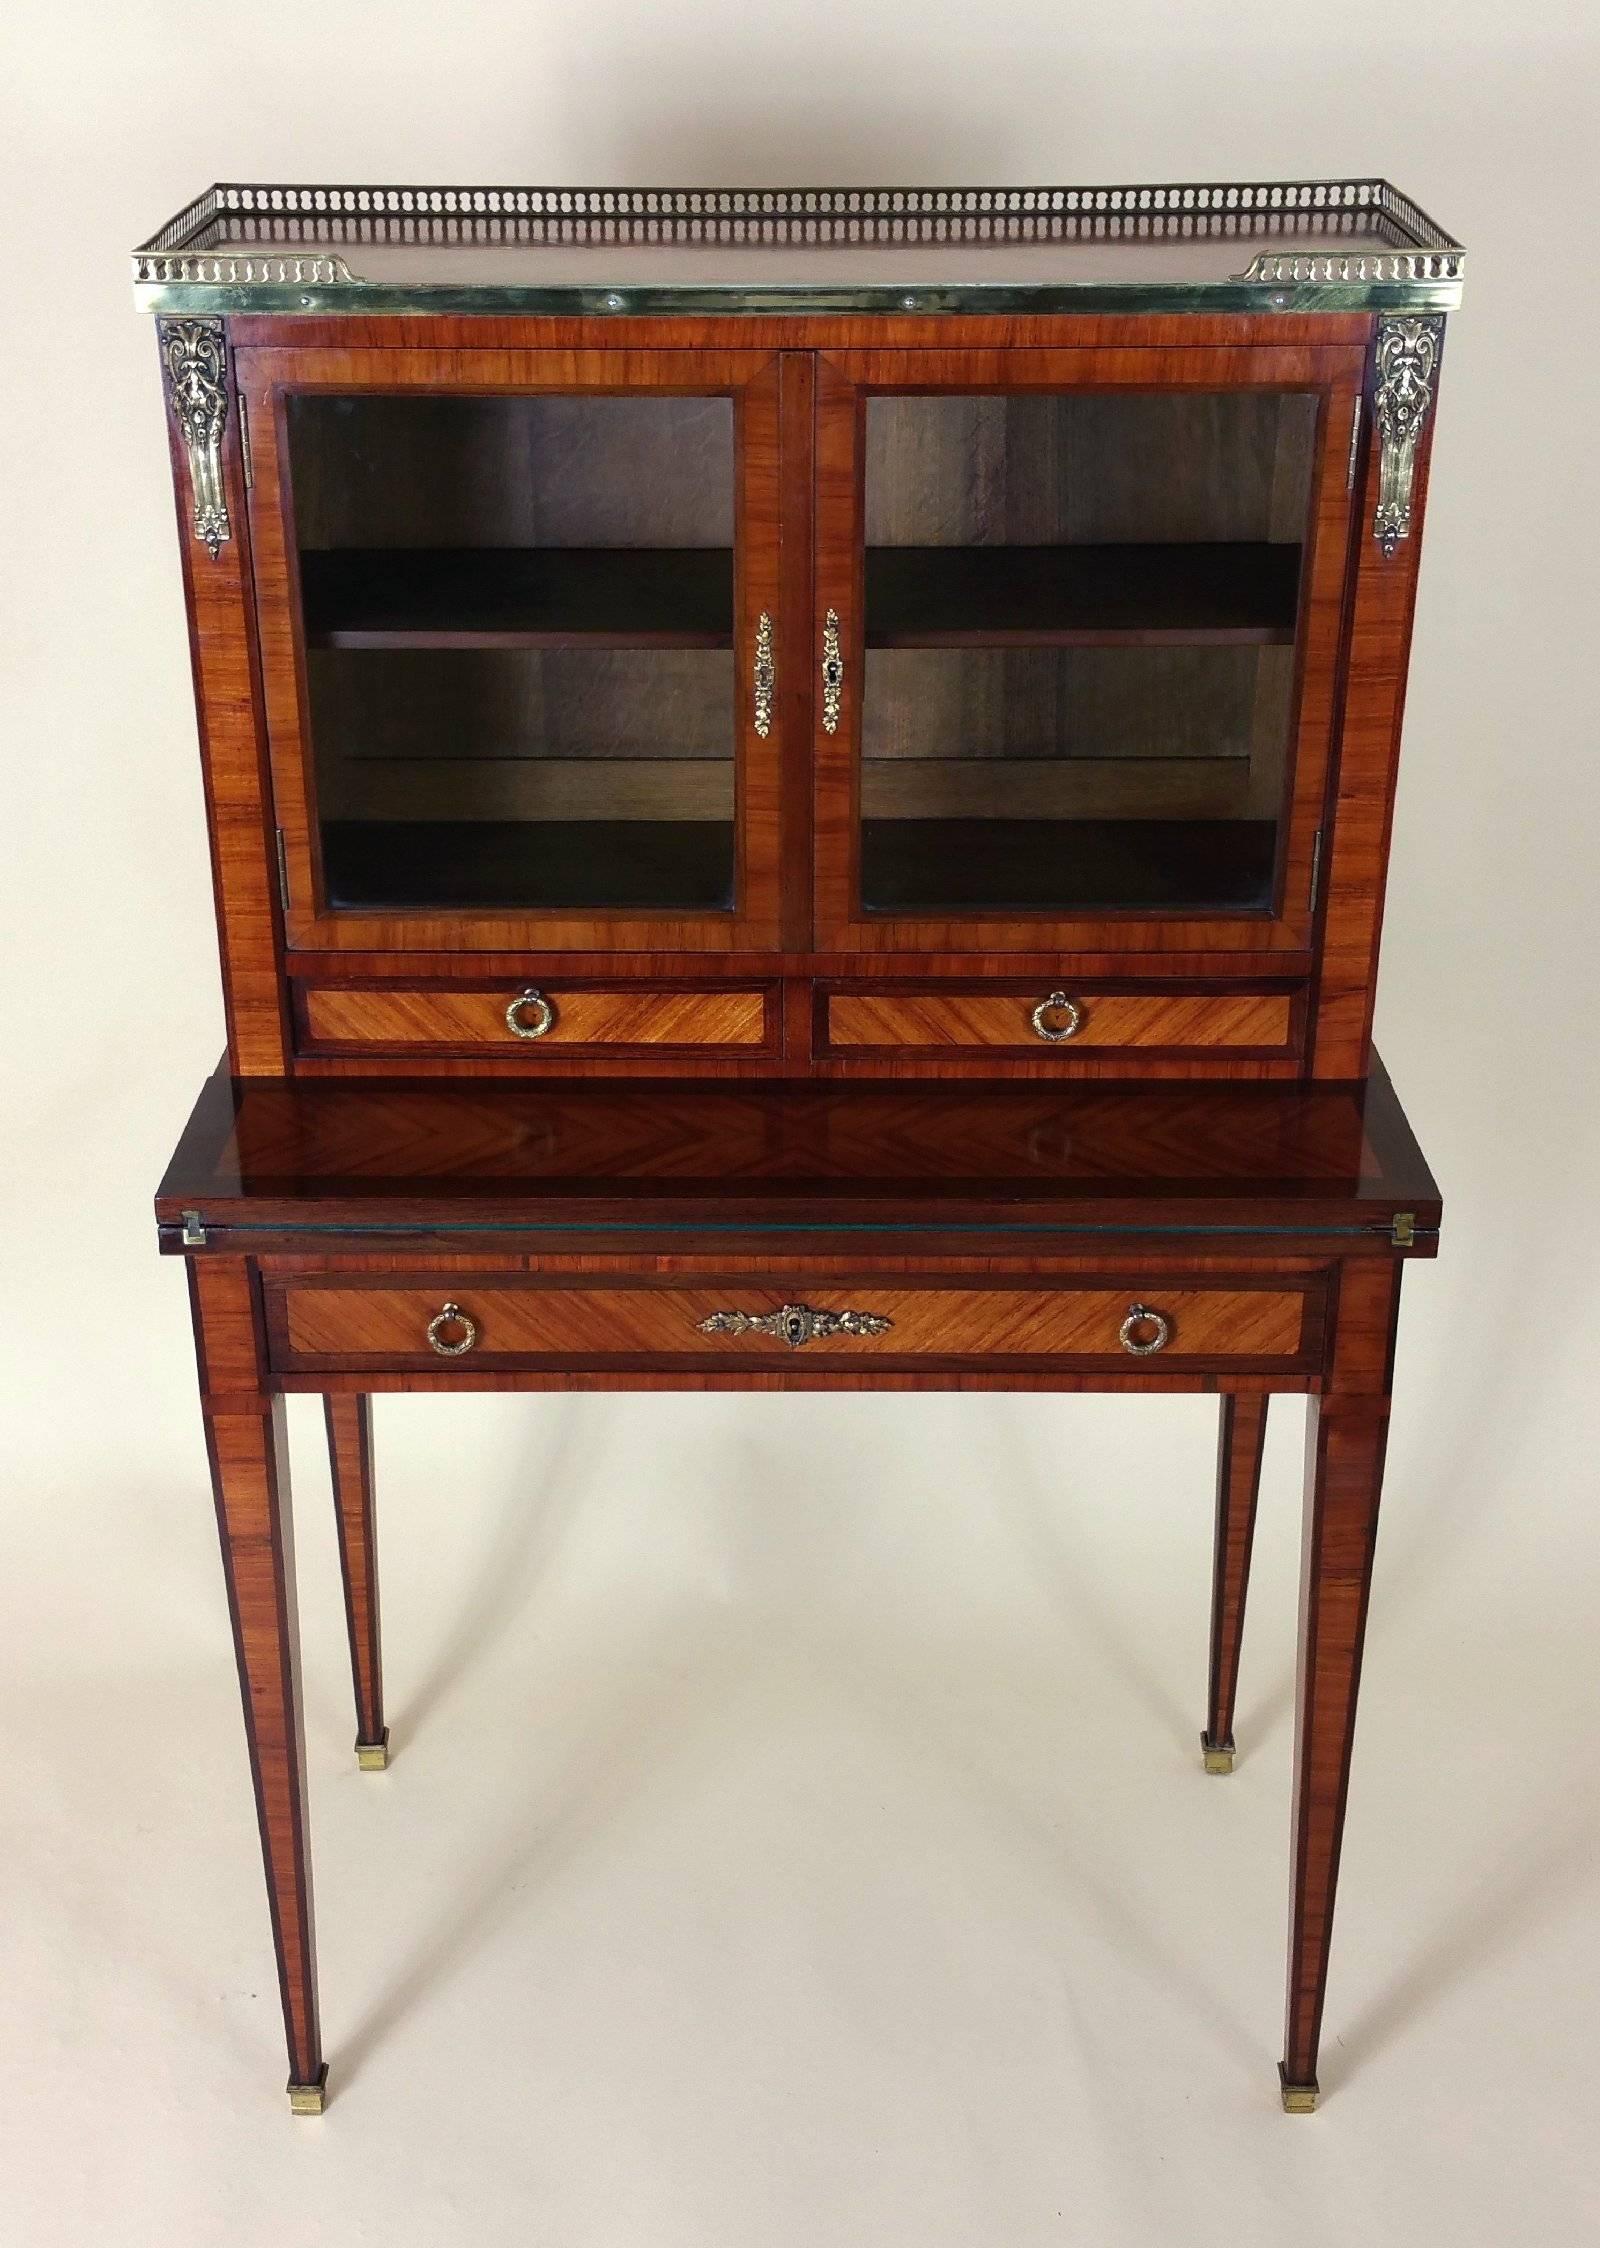 This exquisite and elegant French kingwood and mahogany Bonheur Du Jour, or ‘daytime delight’ is a type of lady’s writing desk and features detailed ormolu mounts, a pierced gallery around the top and long tapered square legs with brass caps. The